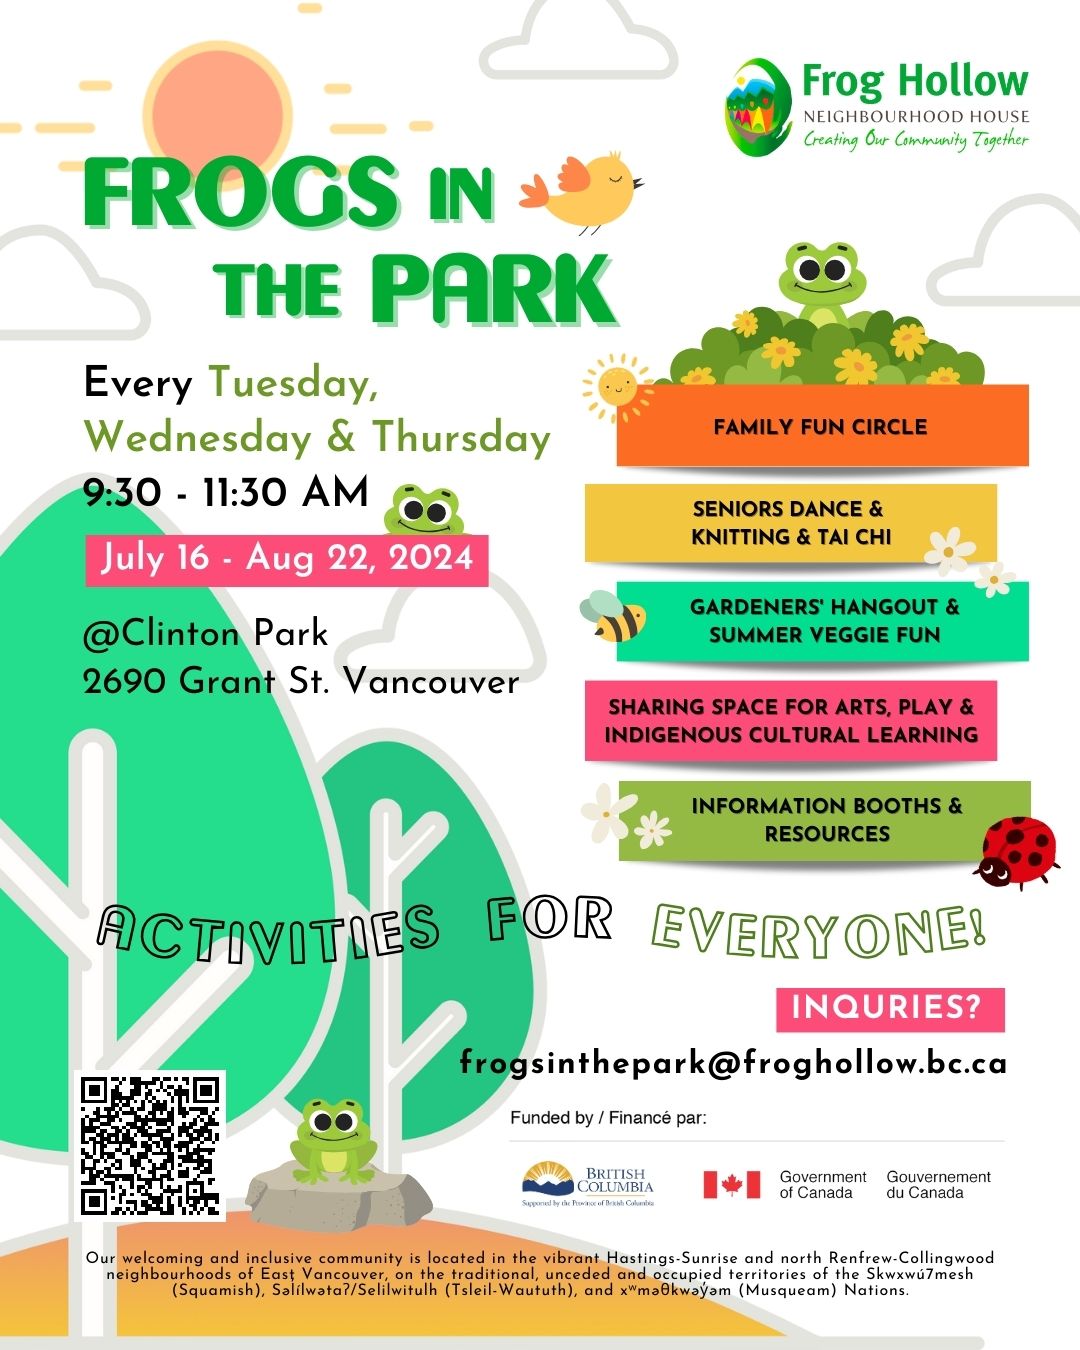 Frogs-in-the-Park